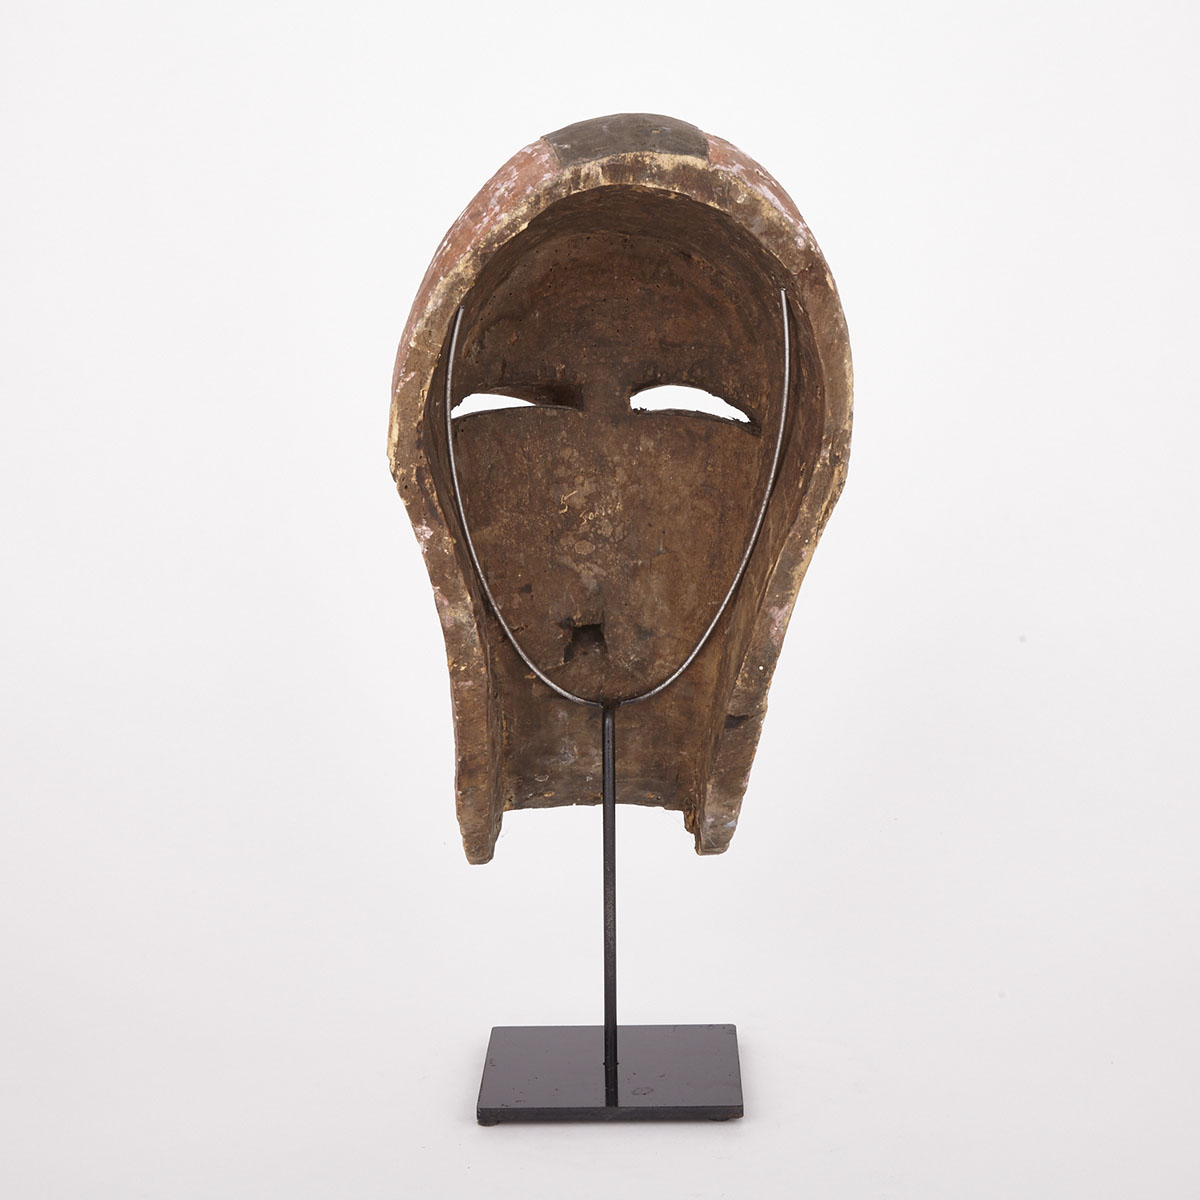 Songye Kifwebe Carved and Painted Wood Mask, Central Africa, 20th century